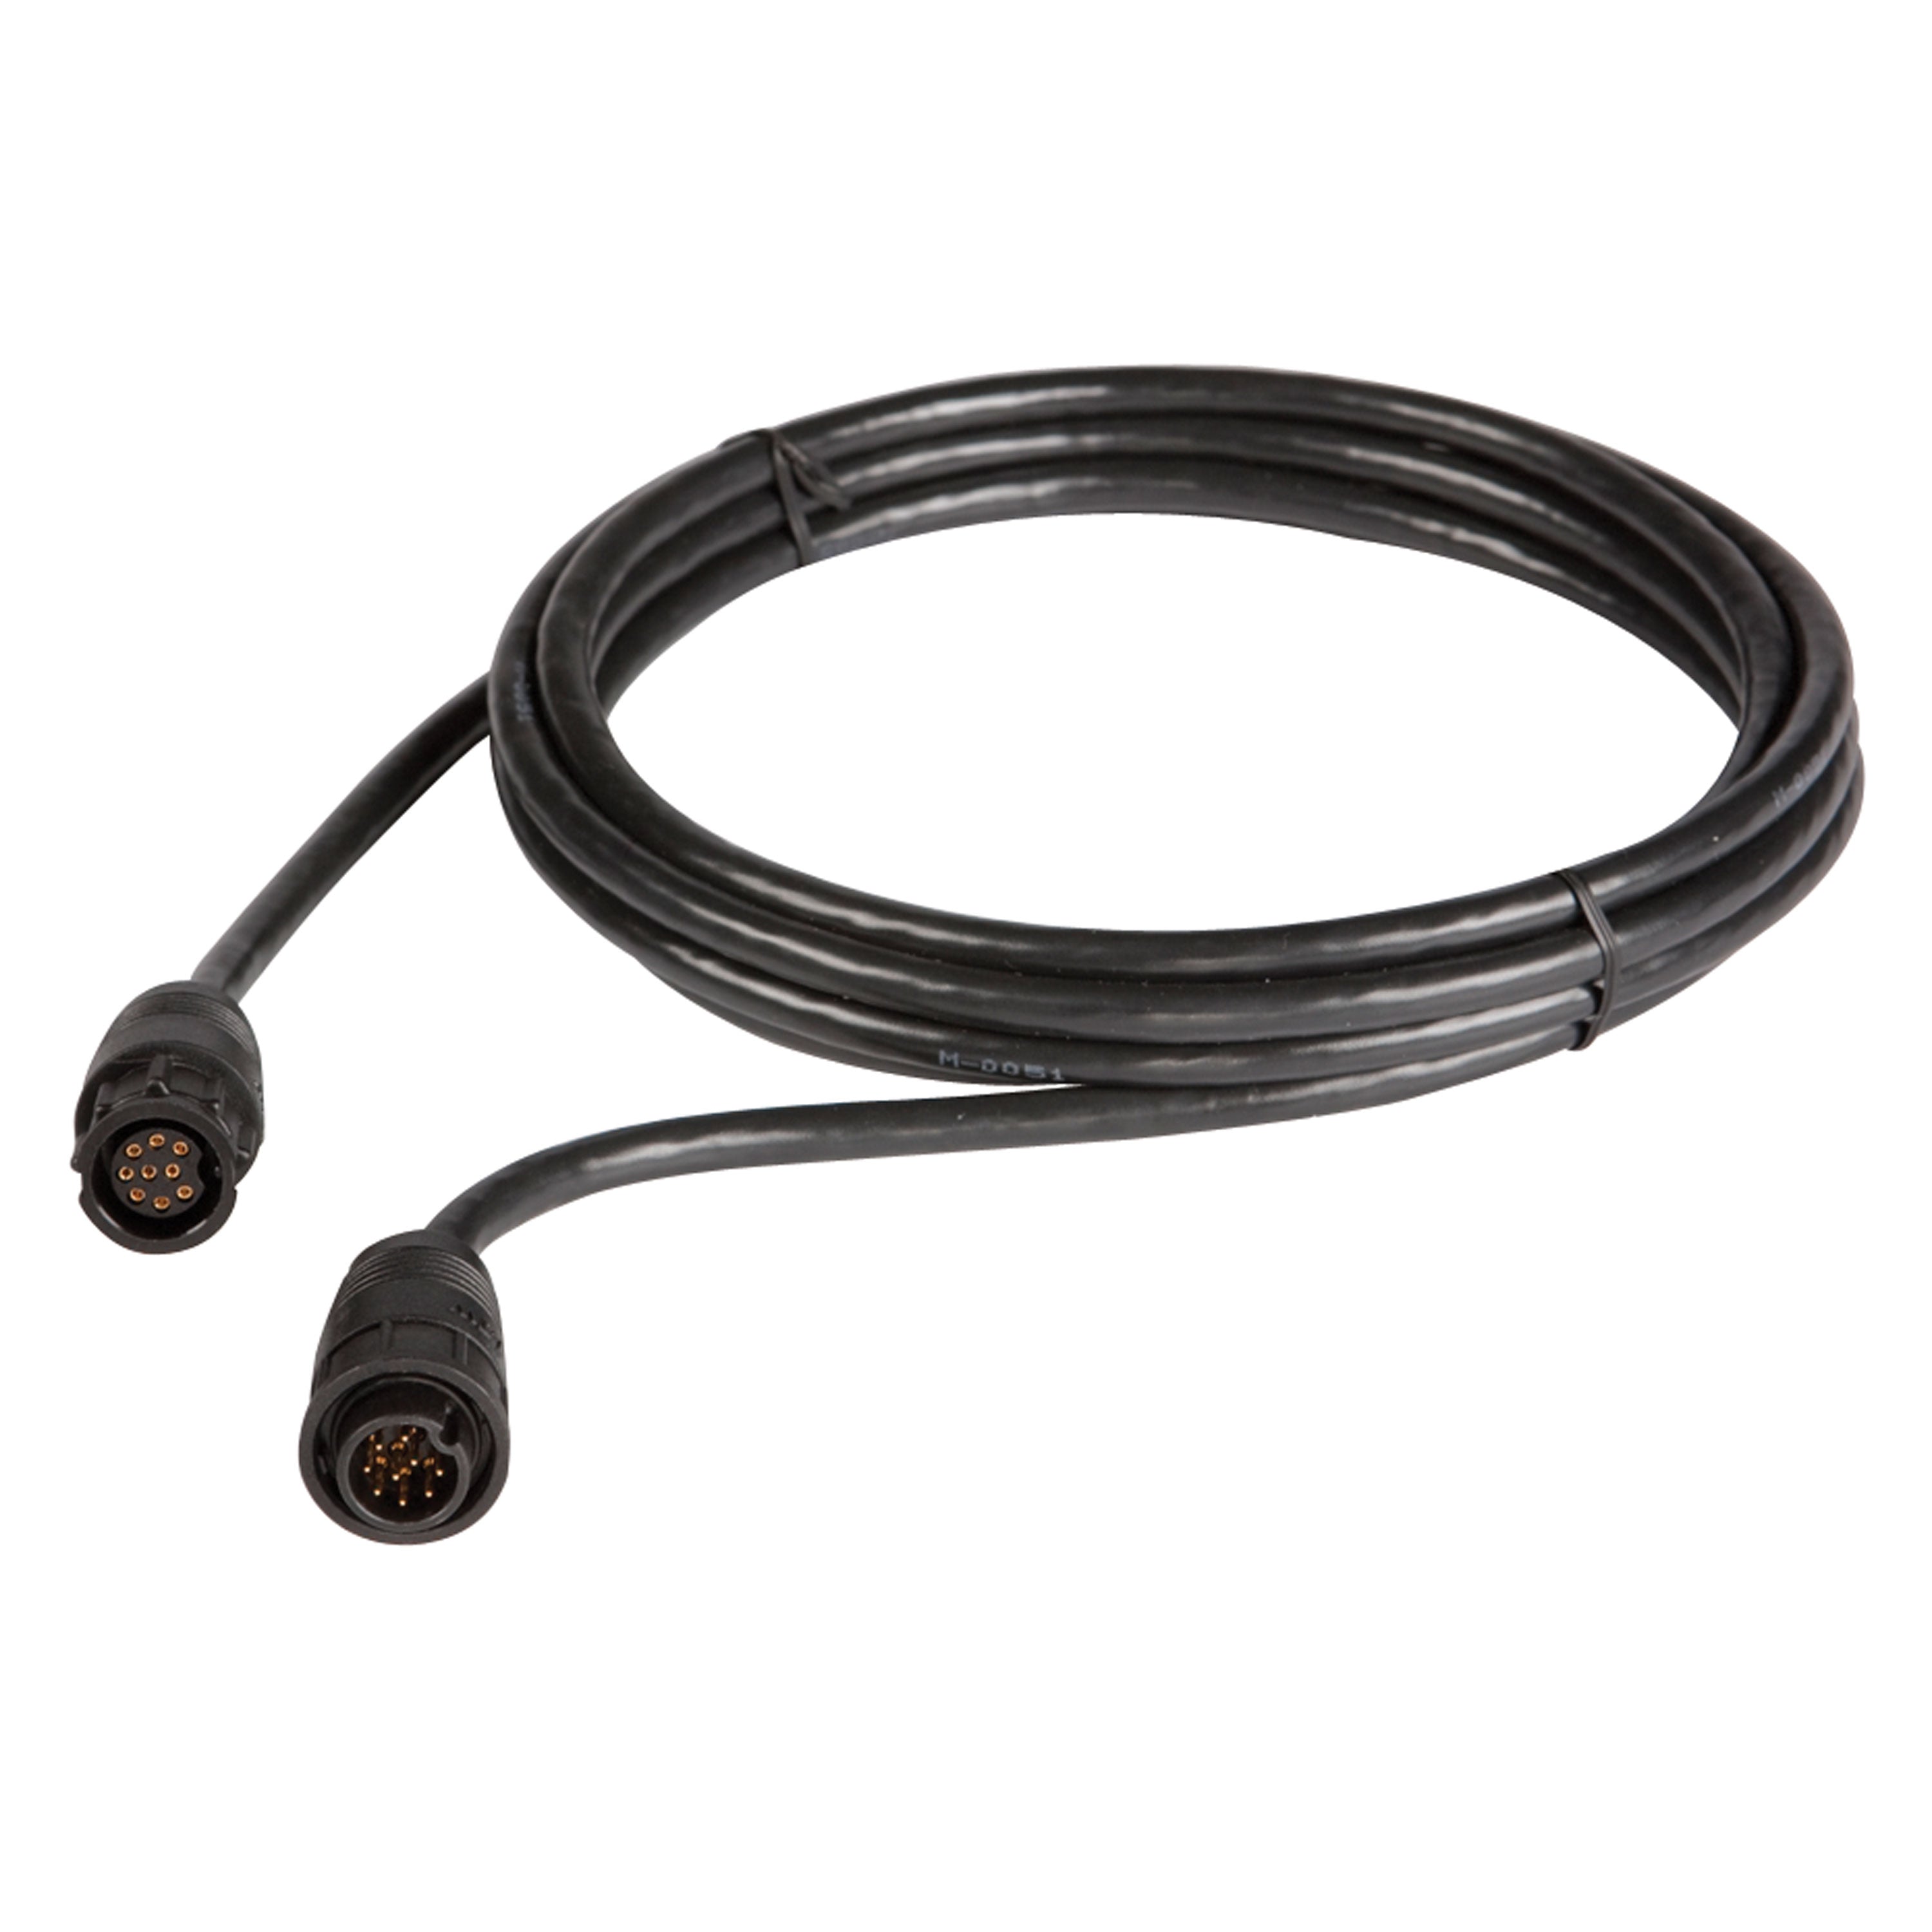 Lowrance 000-00099-006 LSS-1 StructureScan Sonar - 10 ft. 9-Pin Transducer Extension Cable